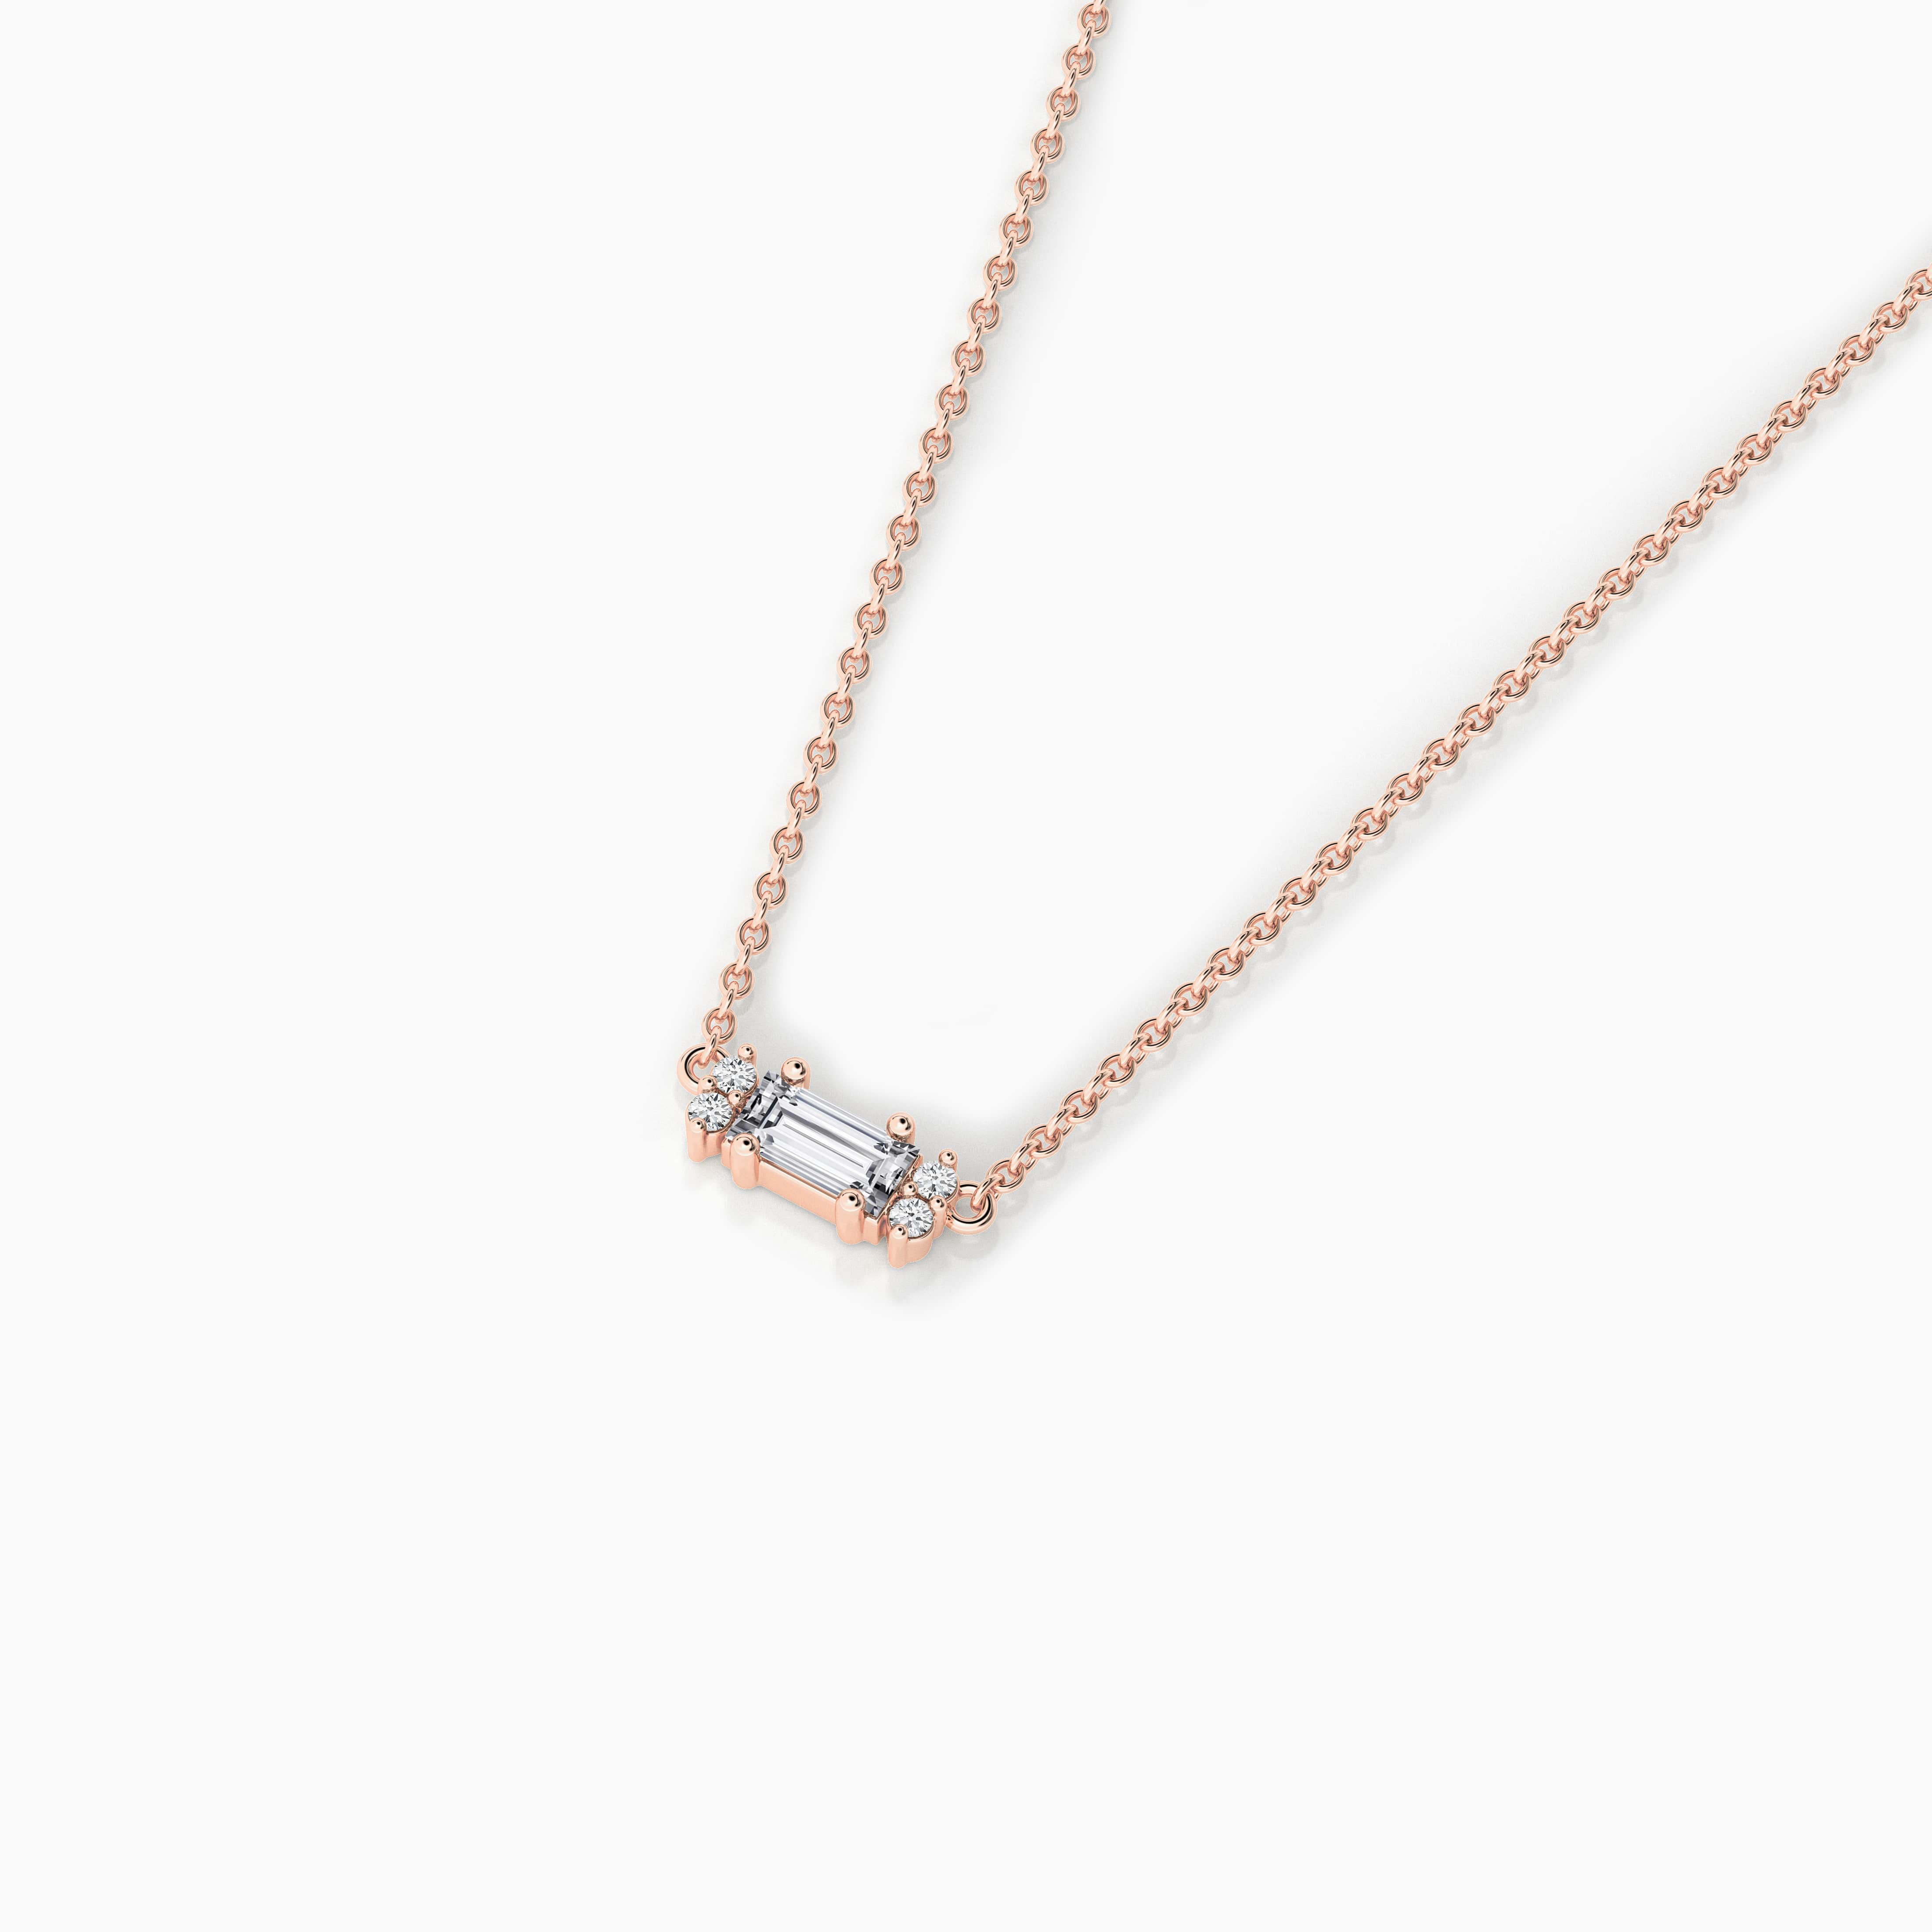 Round and baguette shape diamond pendant necklace in rose gold